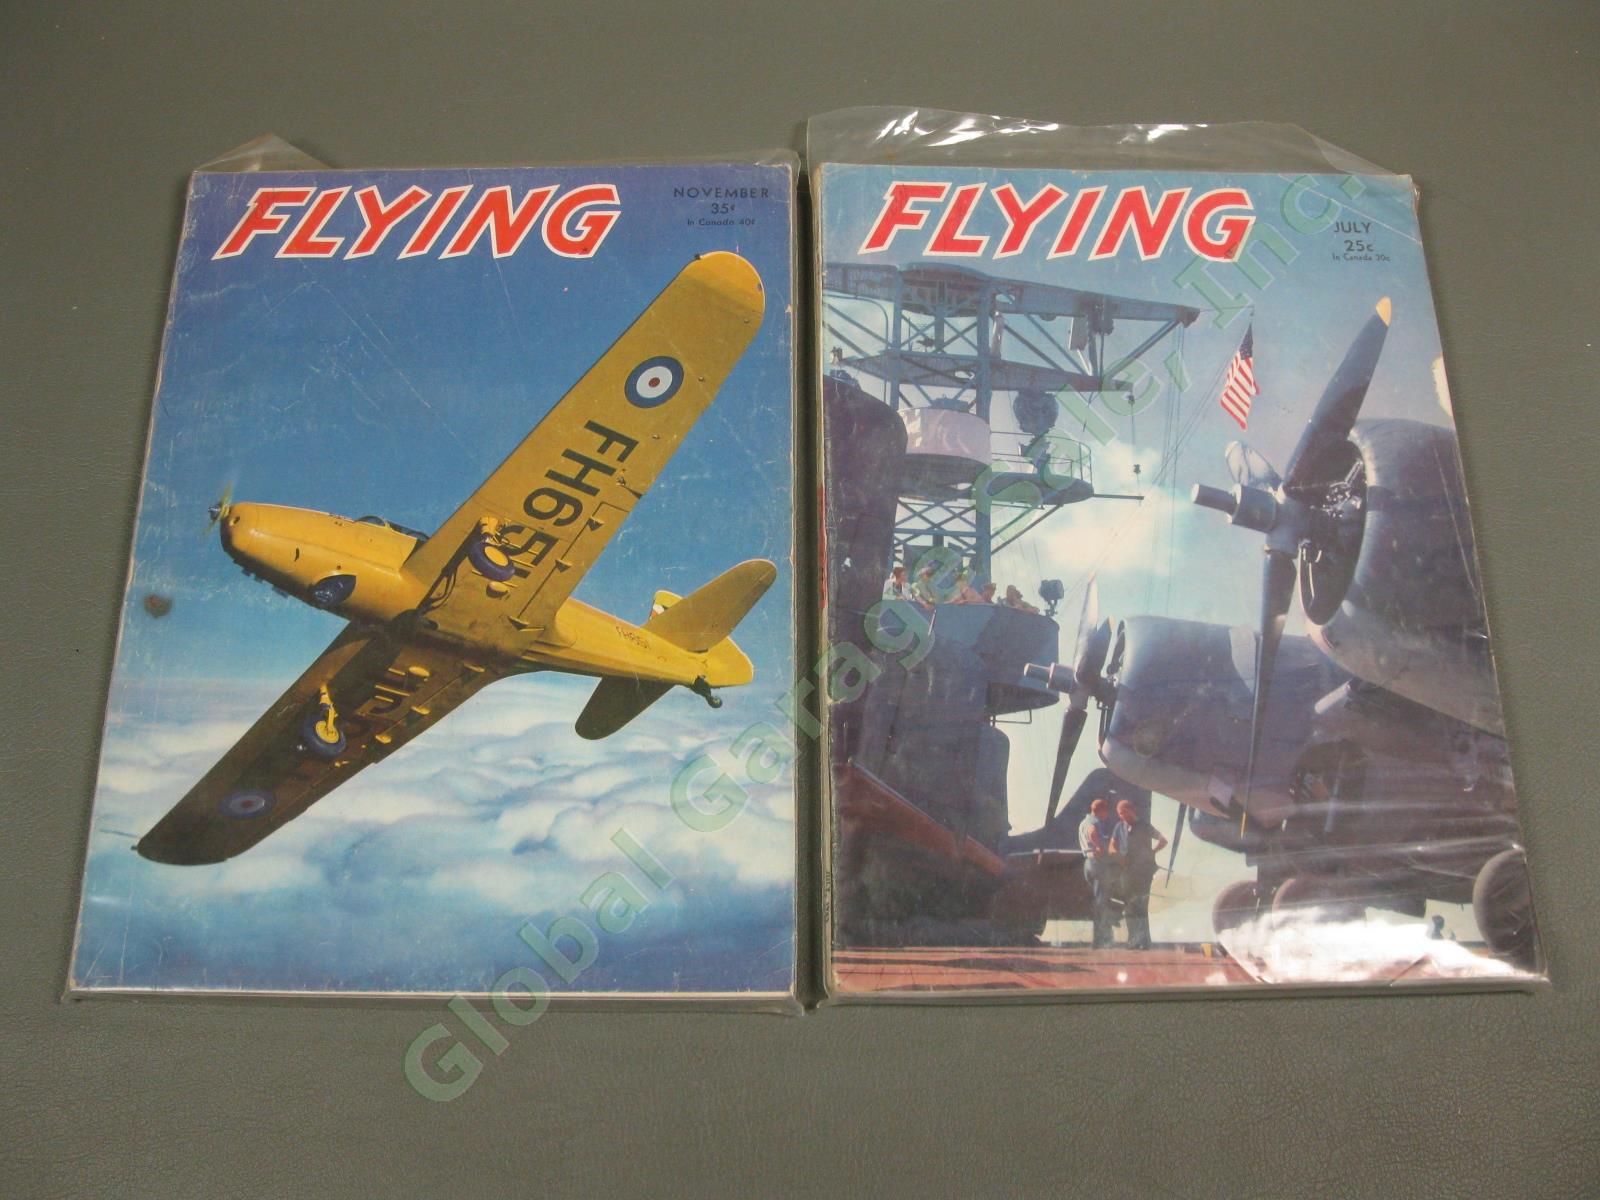 13 Vintage 1942 1943 Flying Magazine WWII Military Aviation WWW Collection Set 5